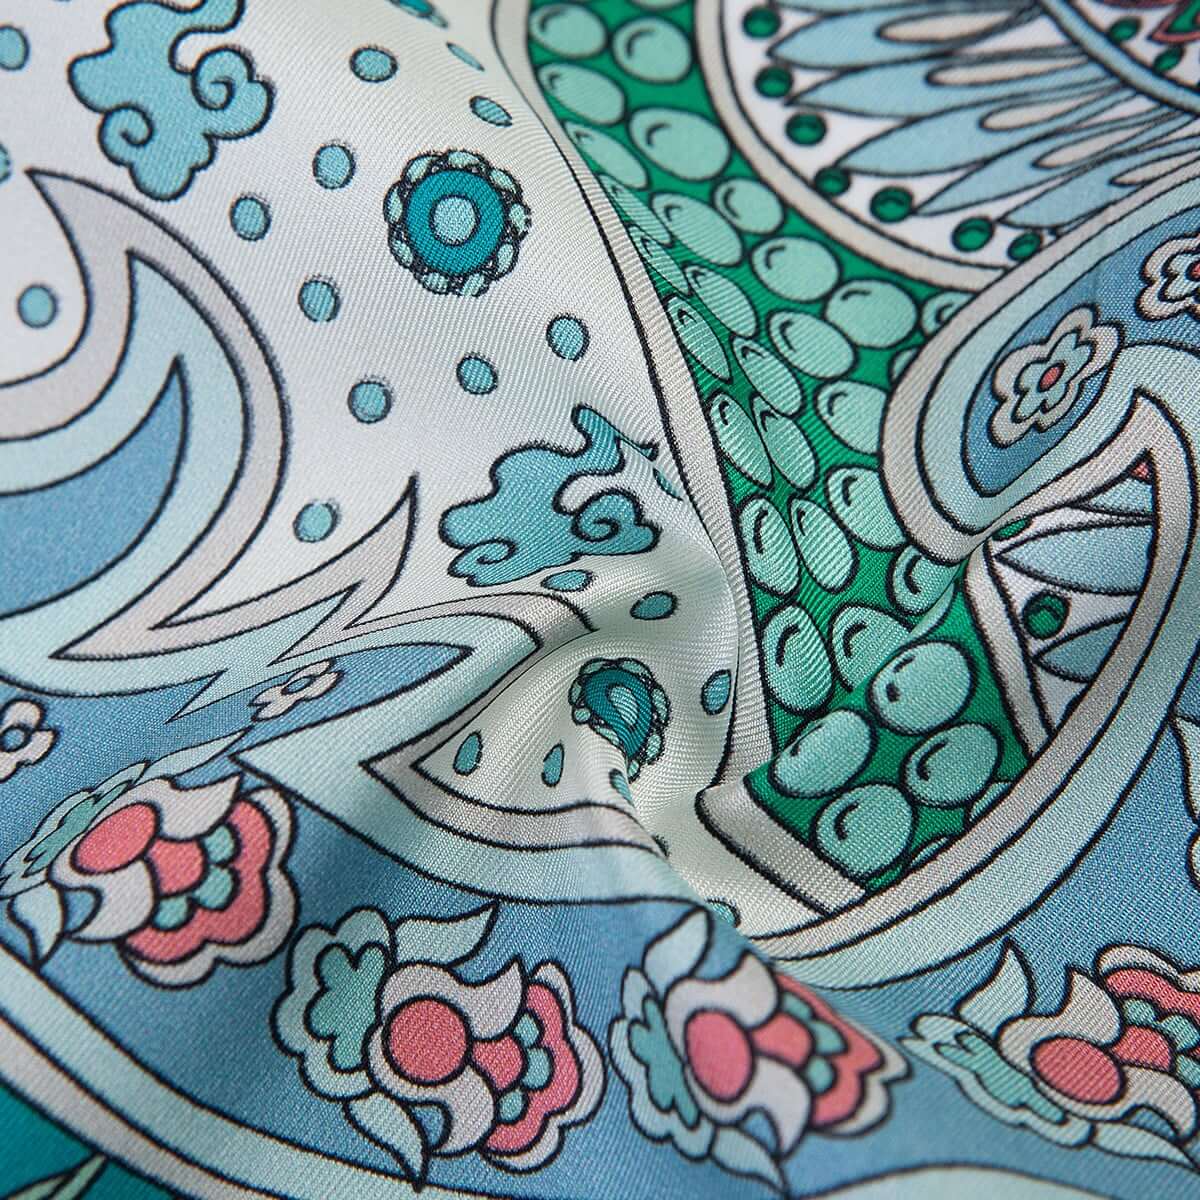 Mulberry Silk Scarf Square, Paisley Fantasy Floral Turquoise